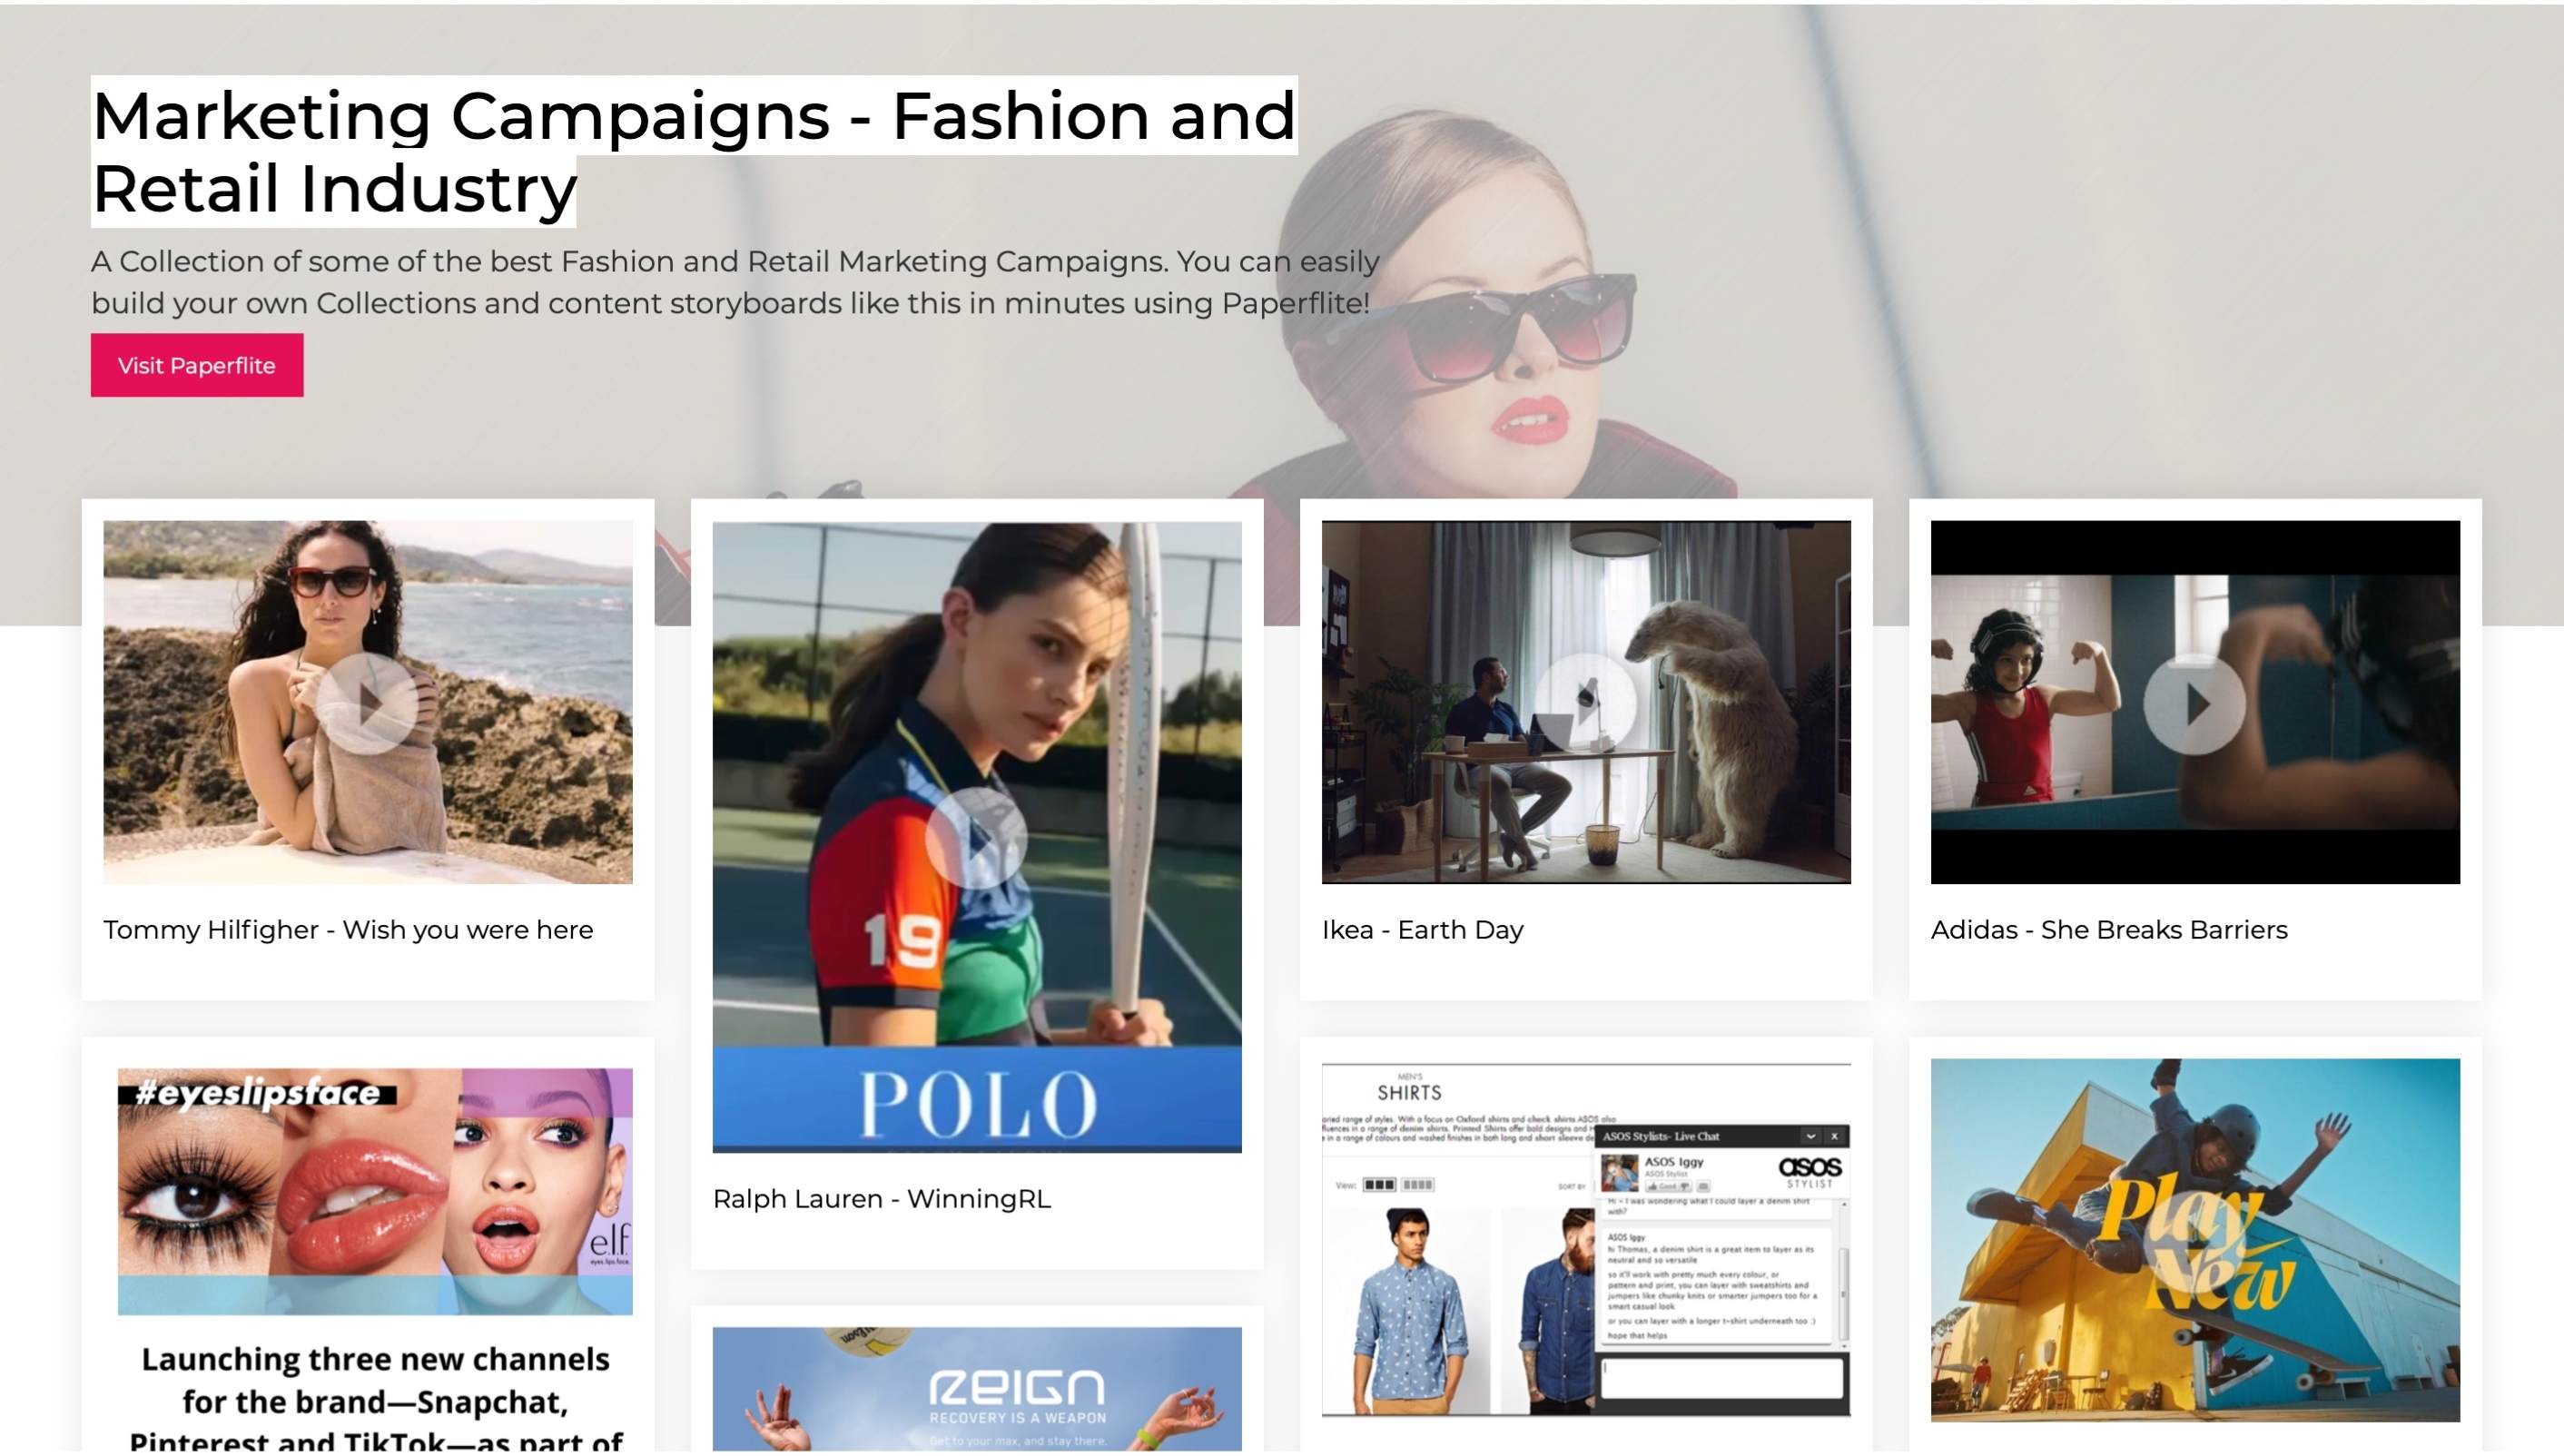 A Paperflite collection of Marketing Campaign examples in the Fashion and Retail industry